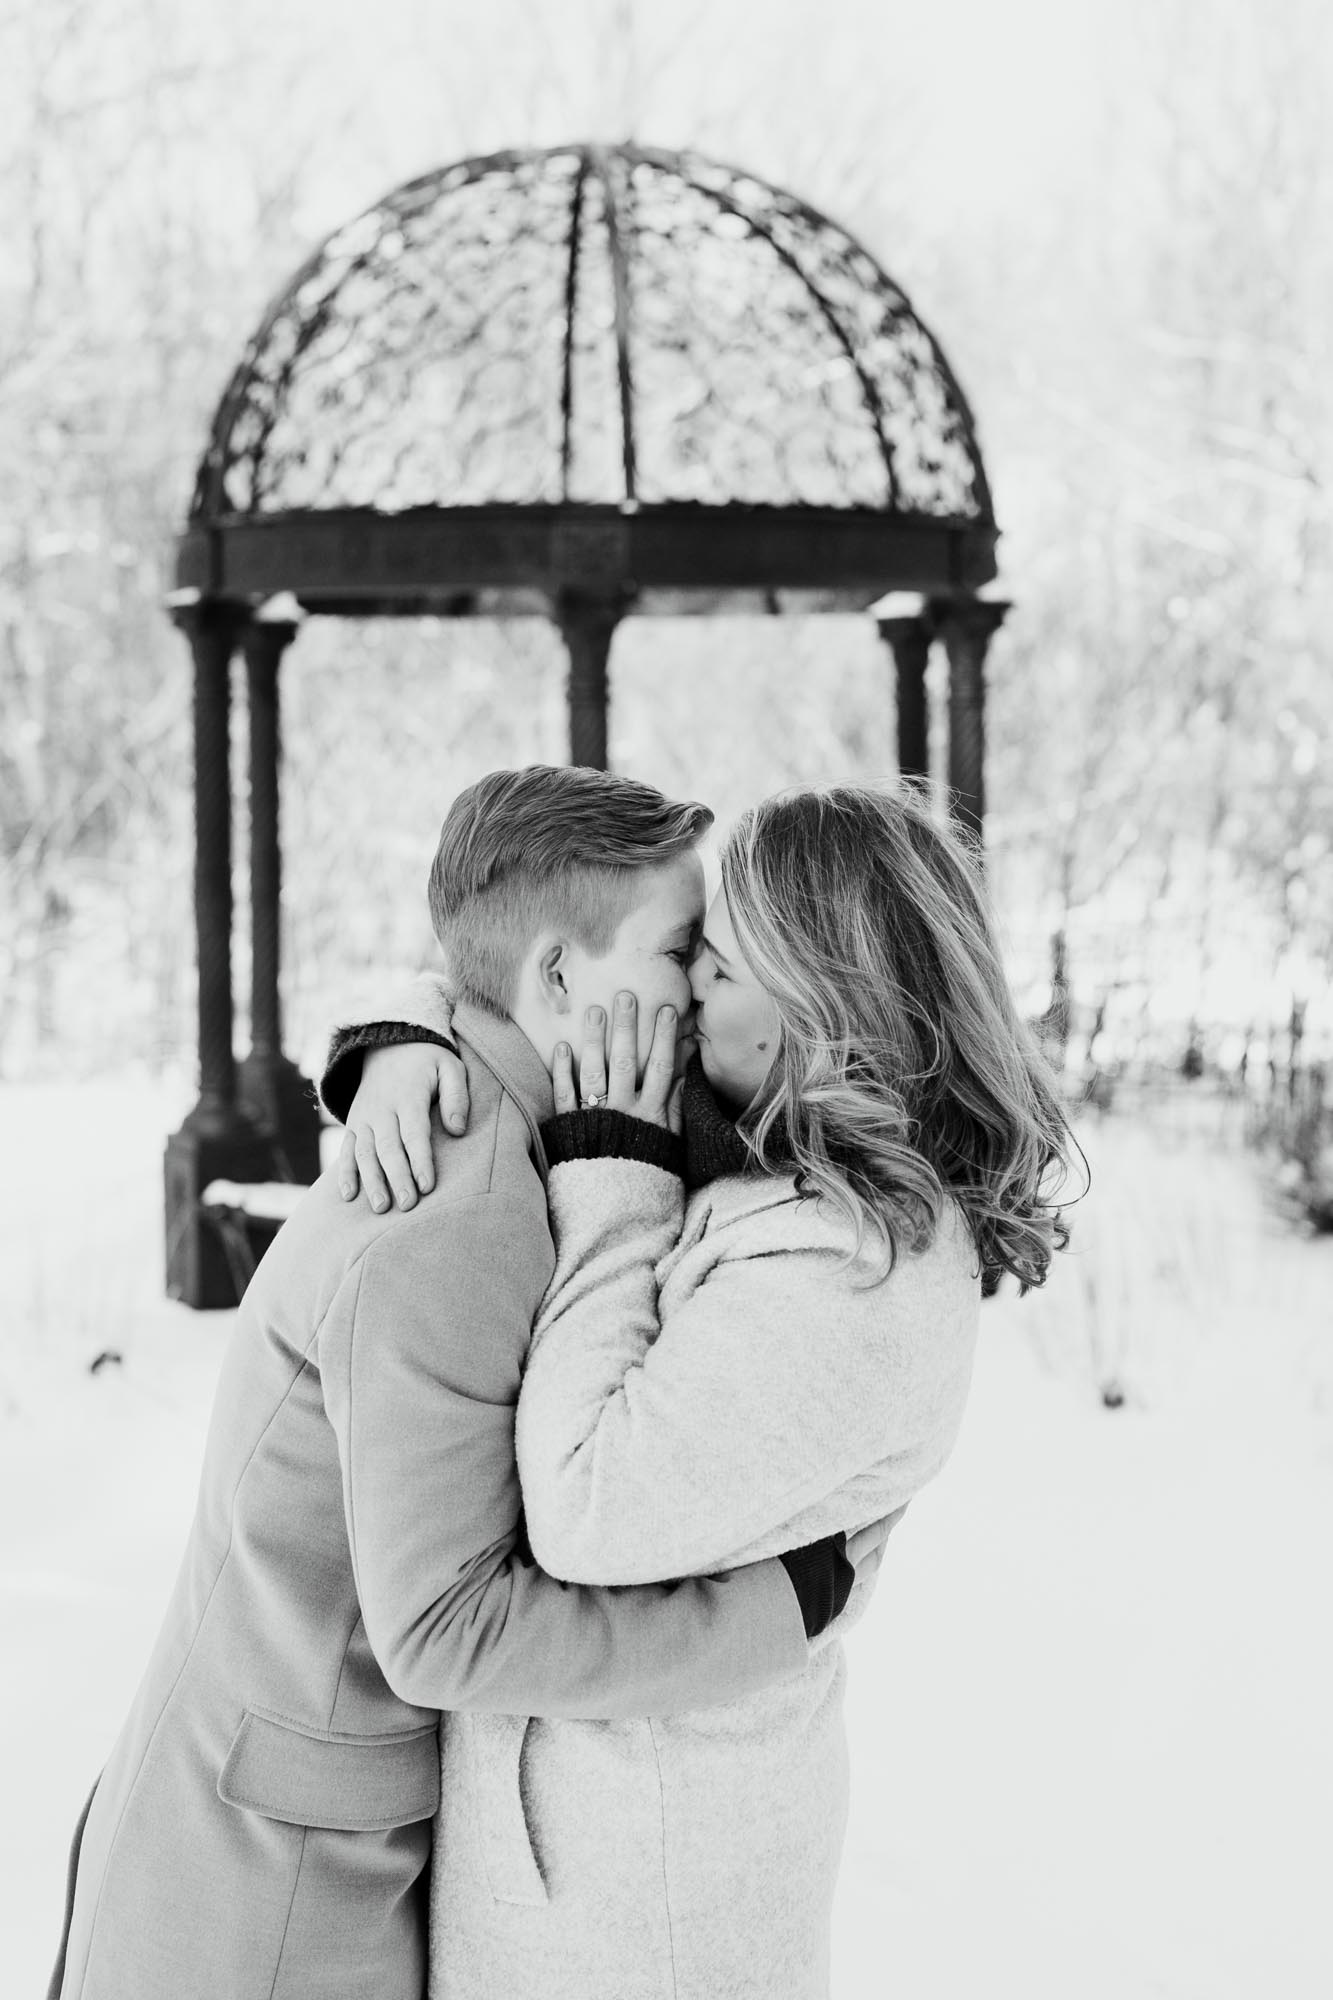 Snowy and sparkling gazebo proposal | Alisha Toole Photography | Featured on Equally Wed, the leading LGBTQ+ wedding magazine